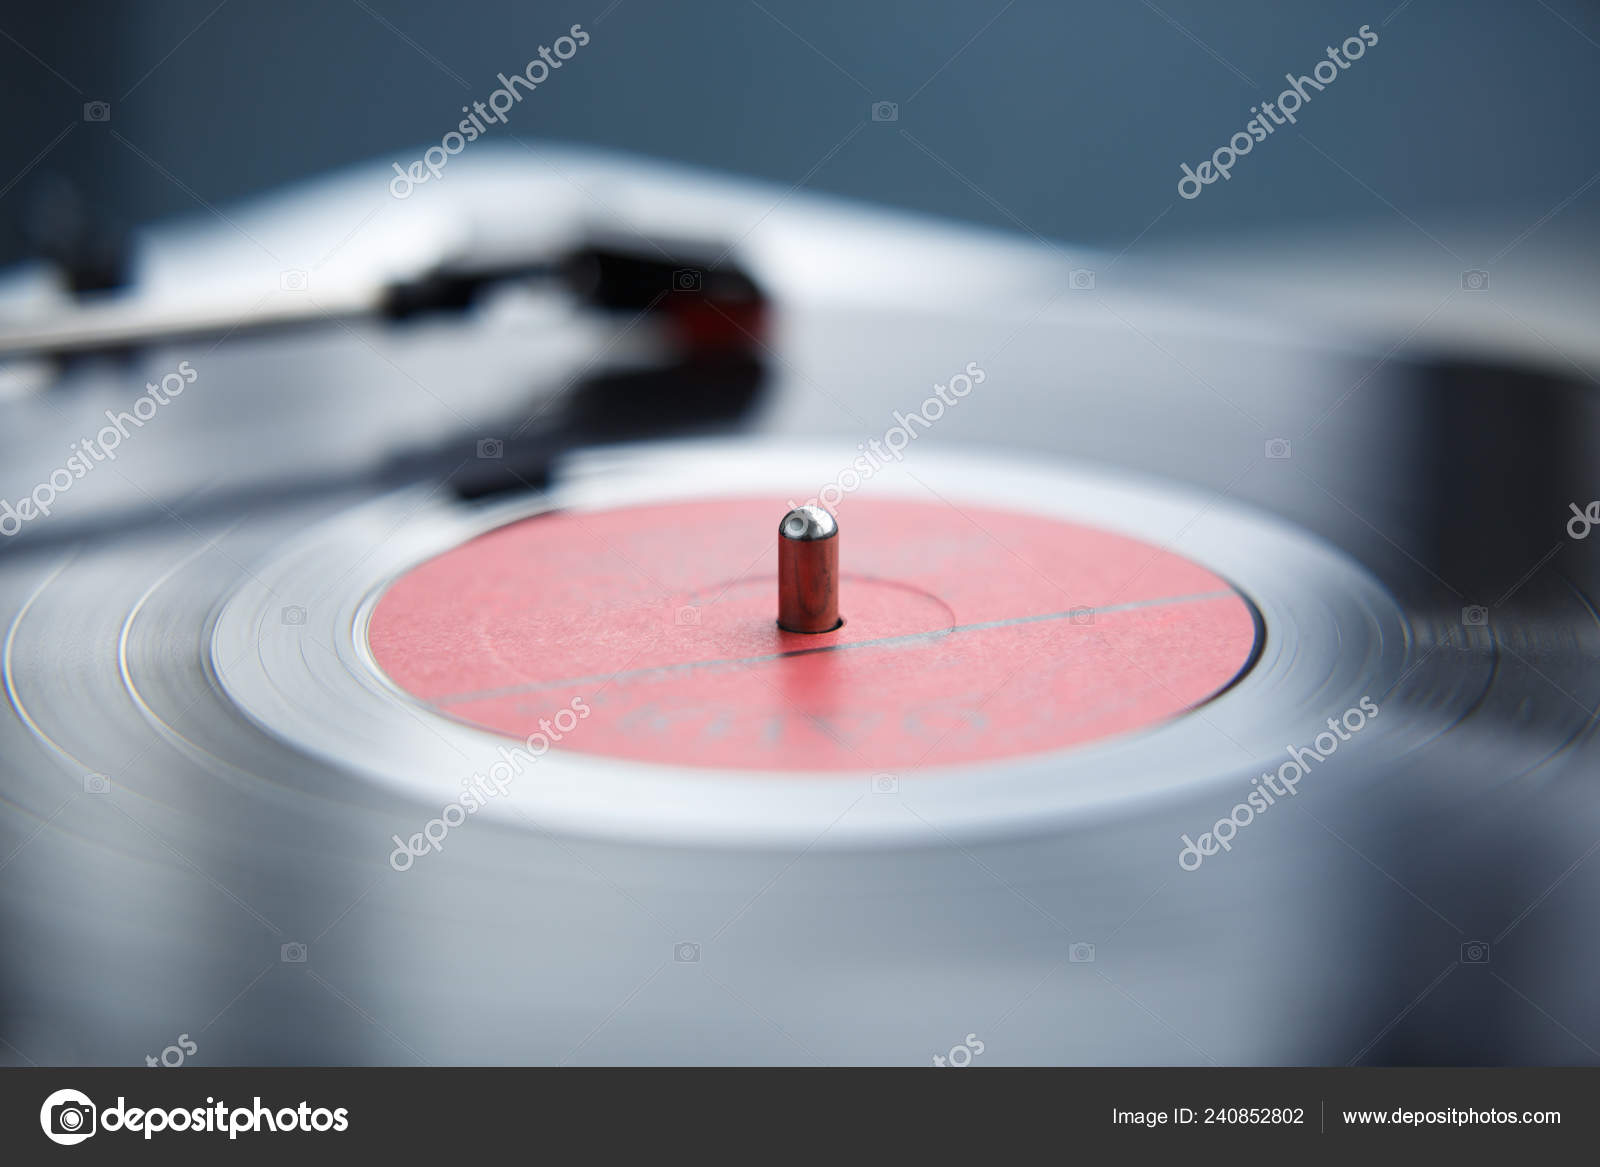 Vintage Turntable Record Player Close Retro Analog Turn Table Device Stock Photo By C Hurricanehank